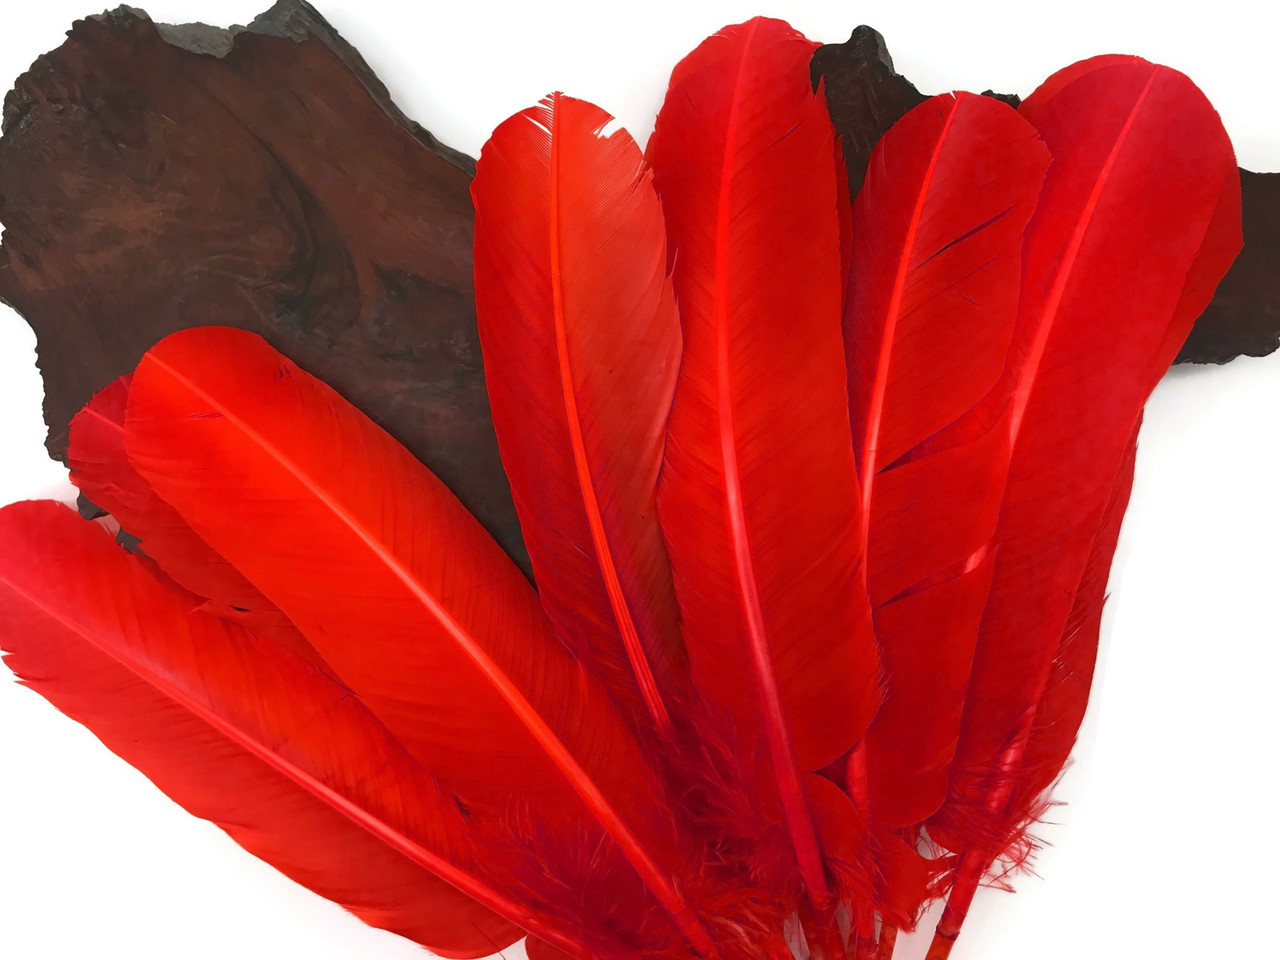 1 Lb. - Red Turkey Tom Rounds Secondary Wing Quill Wholesale Feathers (Bulk)